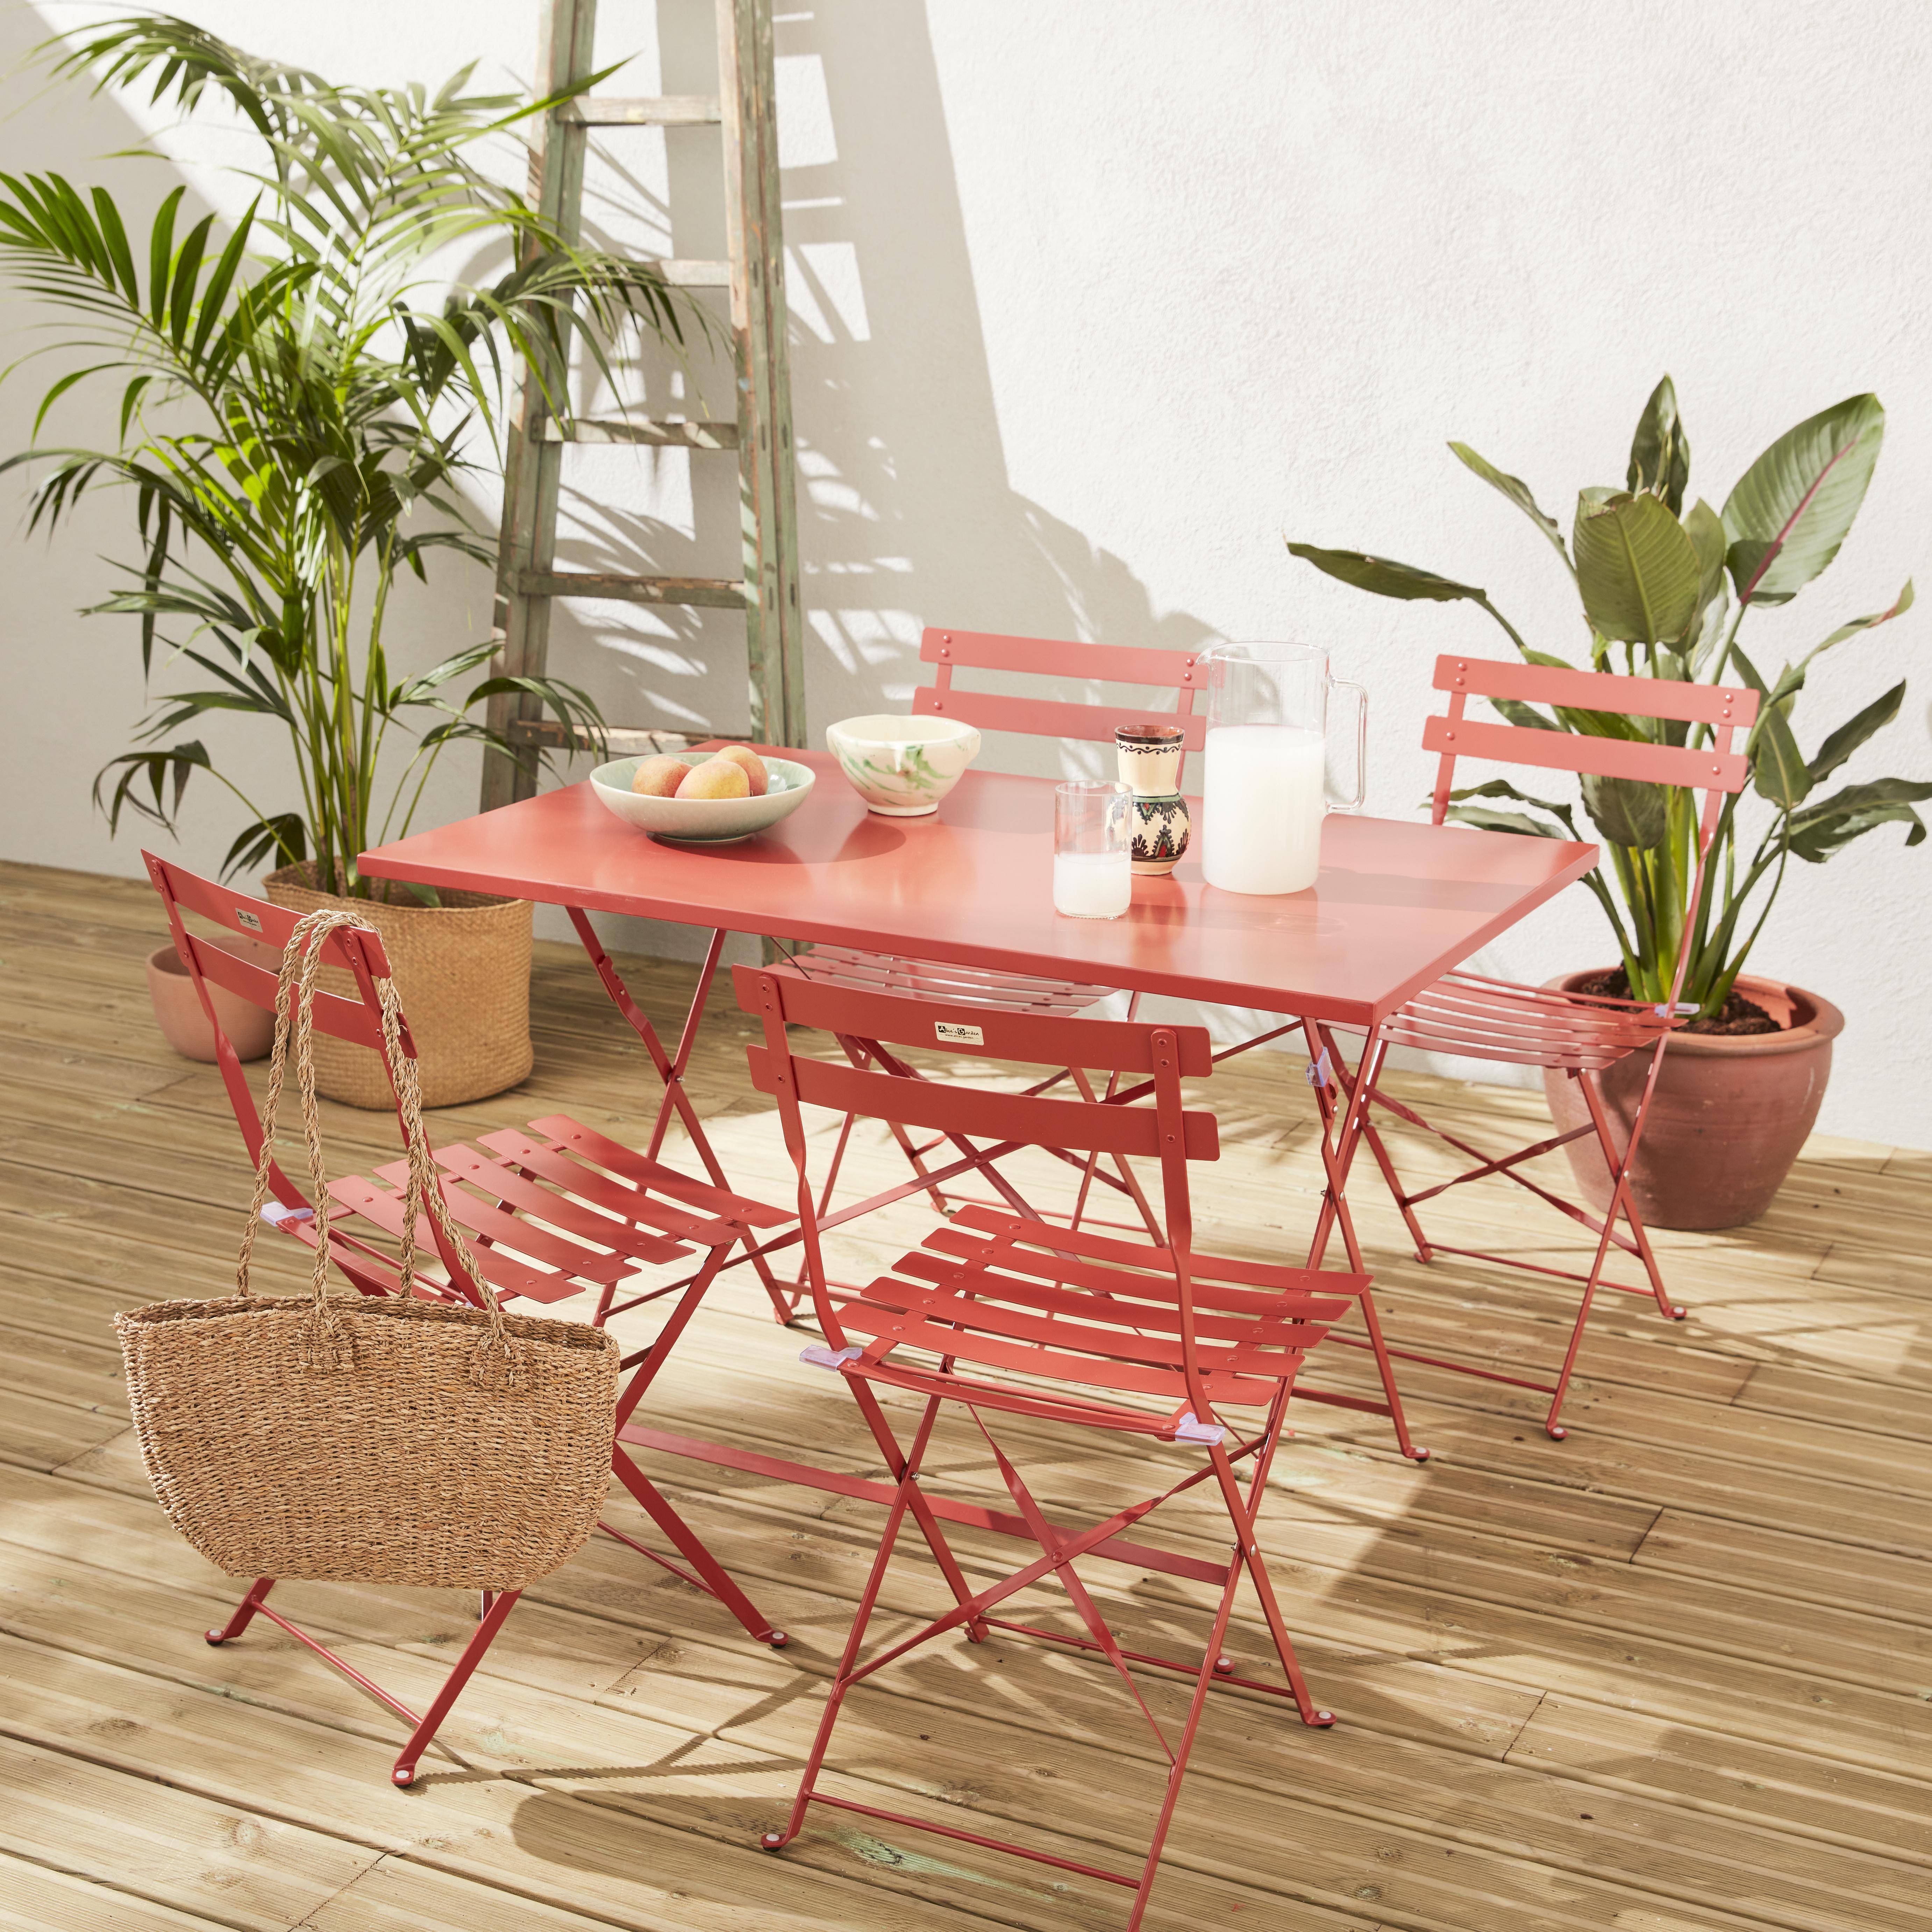 4-seater foldable thermo-lacquered steel bistro garden table with chairs, 110x70cm - Emilia - Terracotta,sweeek,Photo1